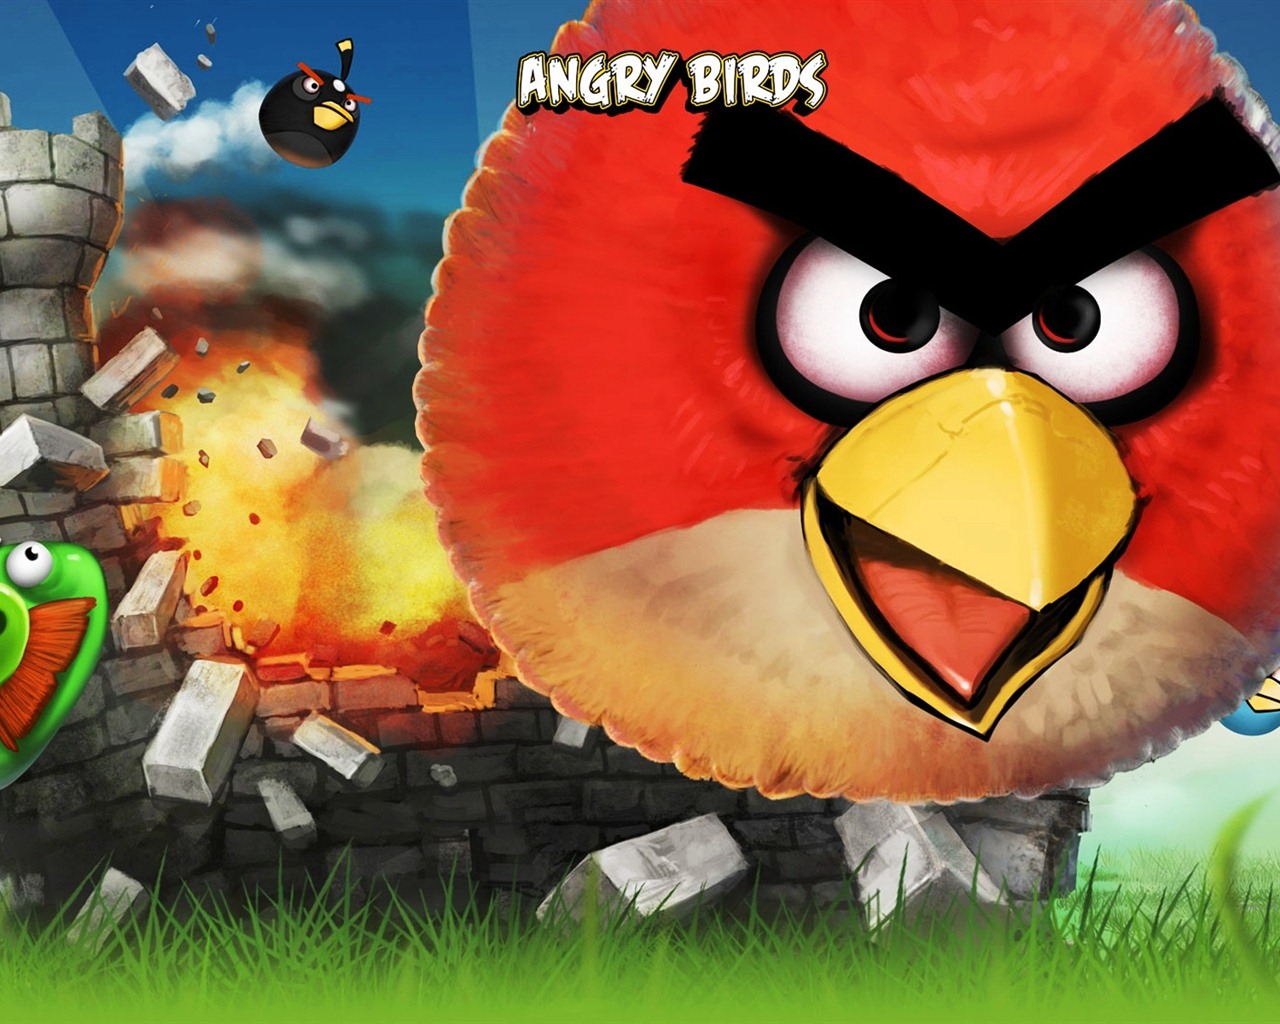 Angry Birds Game Wallpapers #7 - 1280x1024